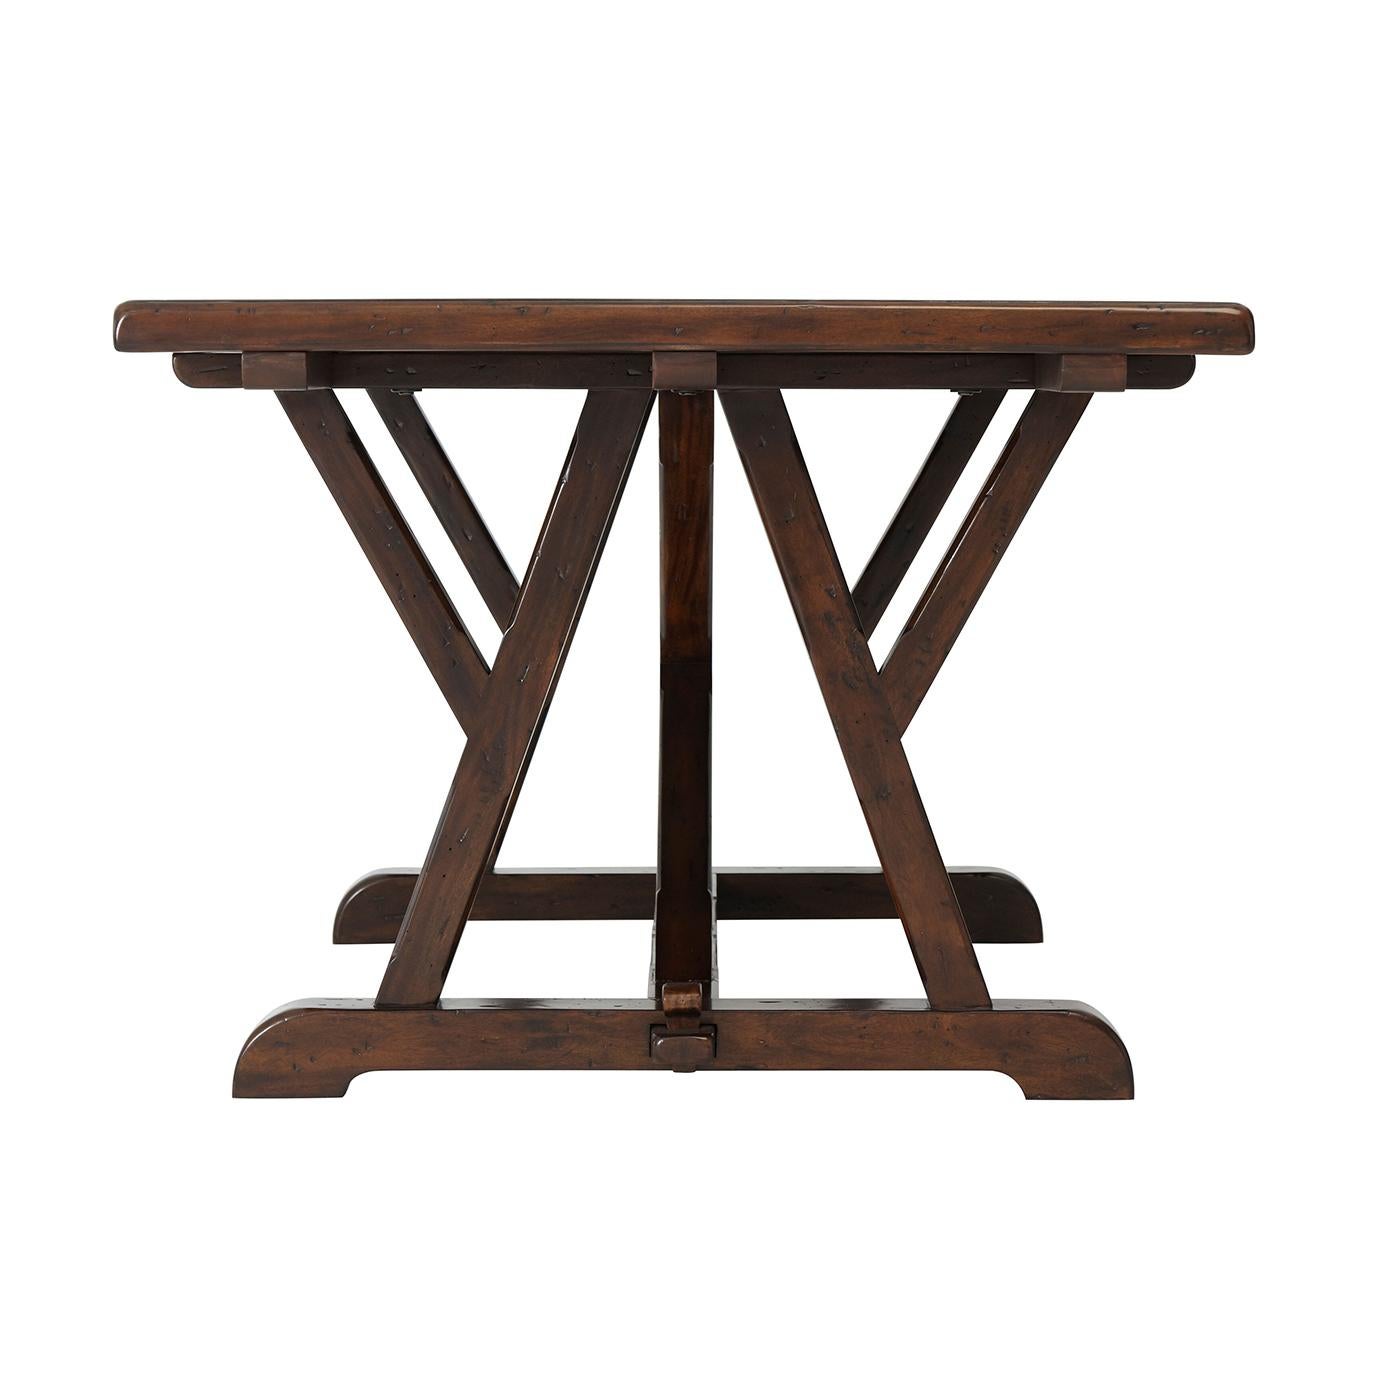 Country Art & Crafts Antiqued Mahogany Dining Table